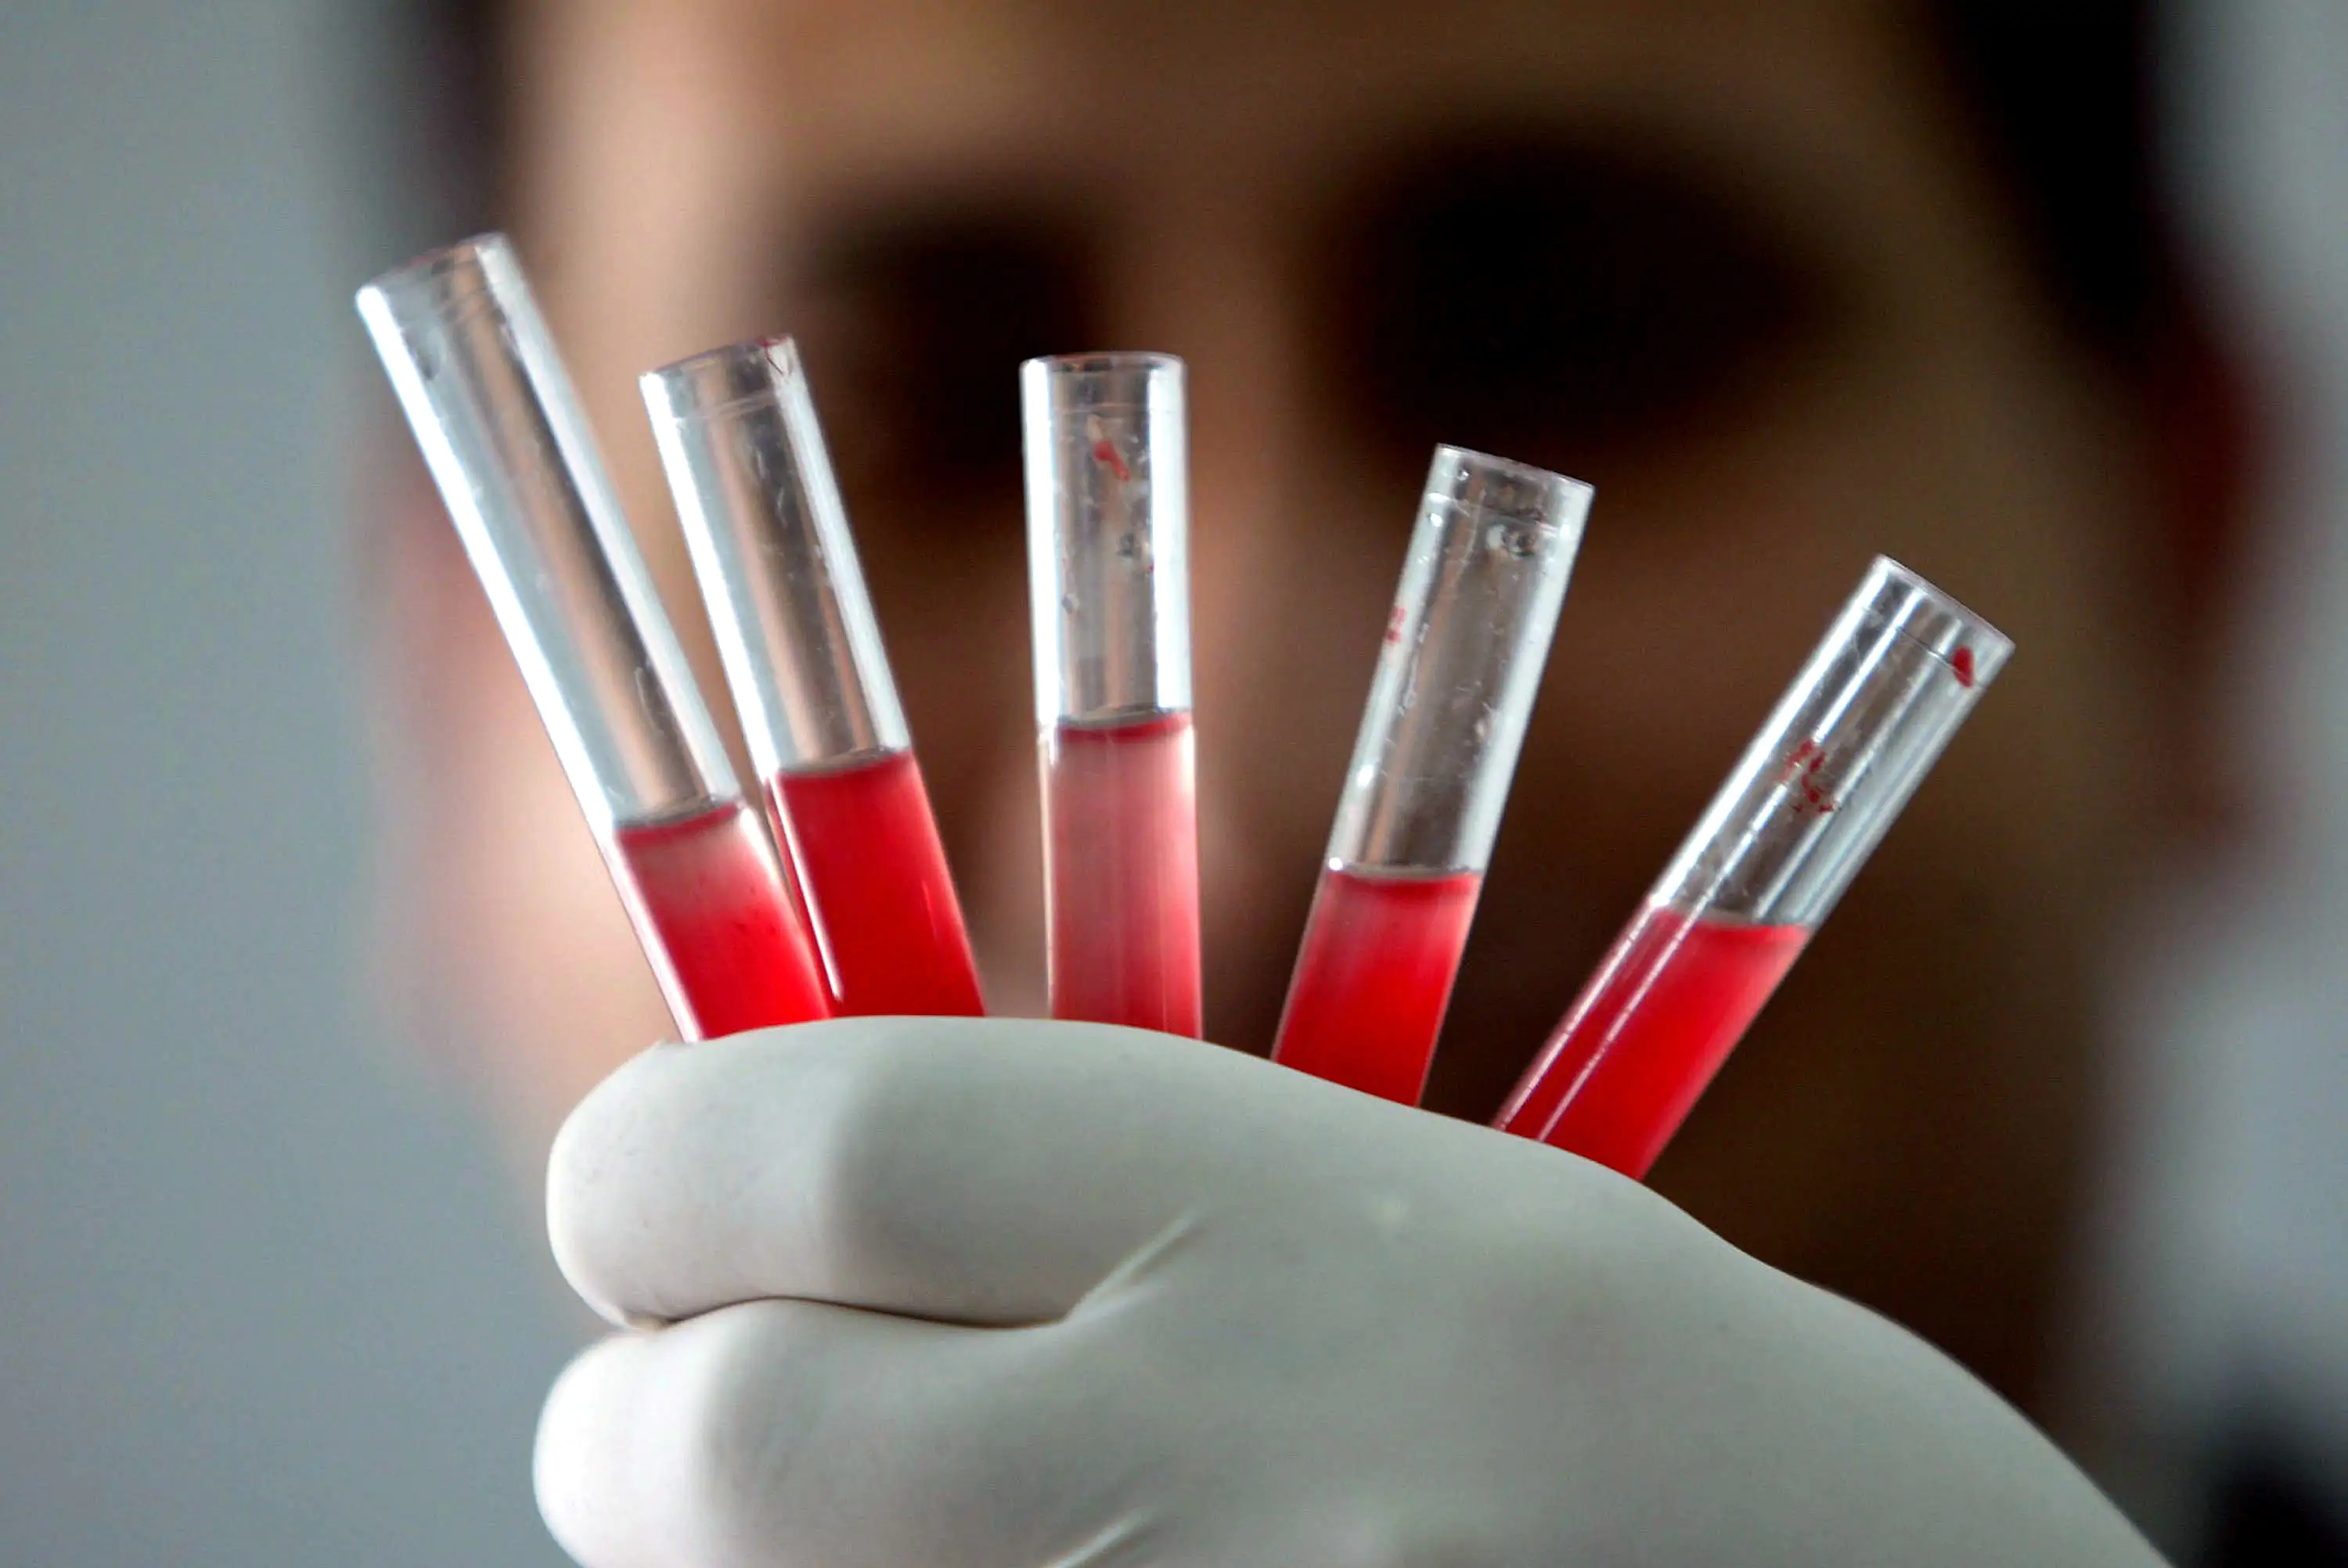 New blood types are often discovered following medical disasters